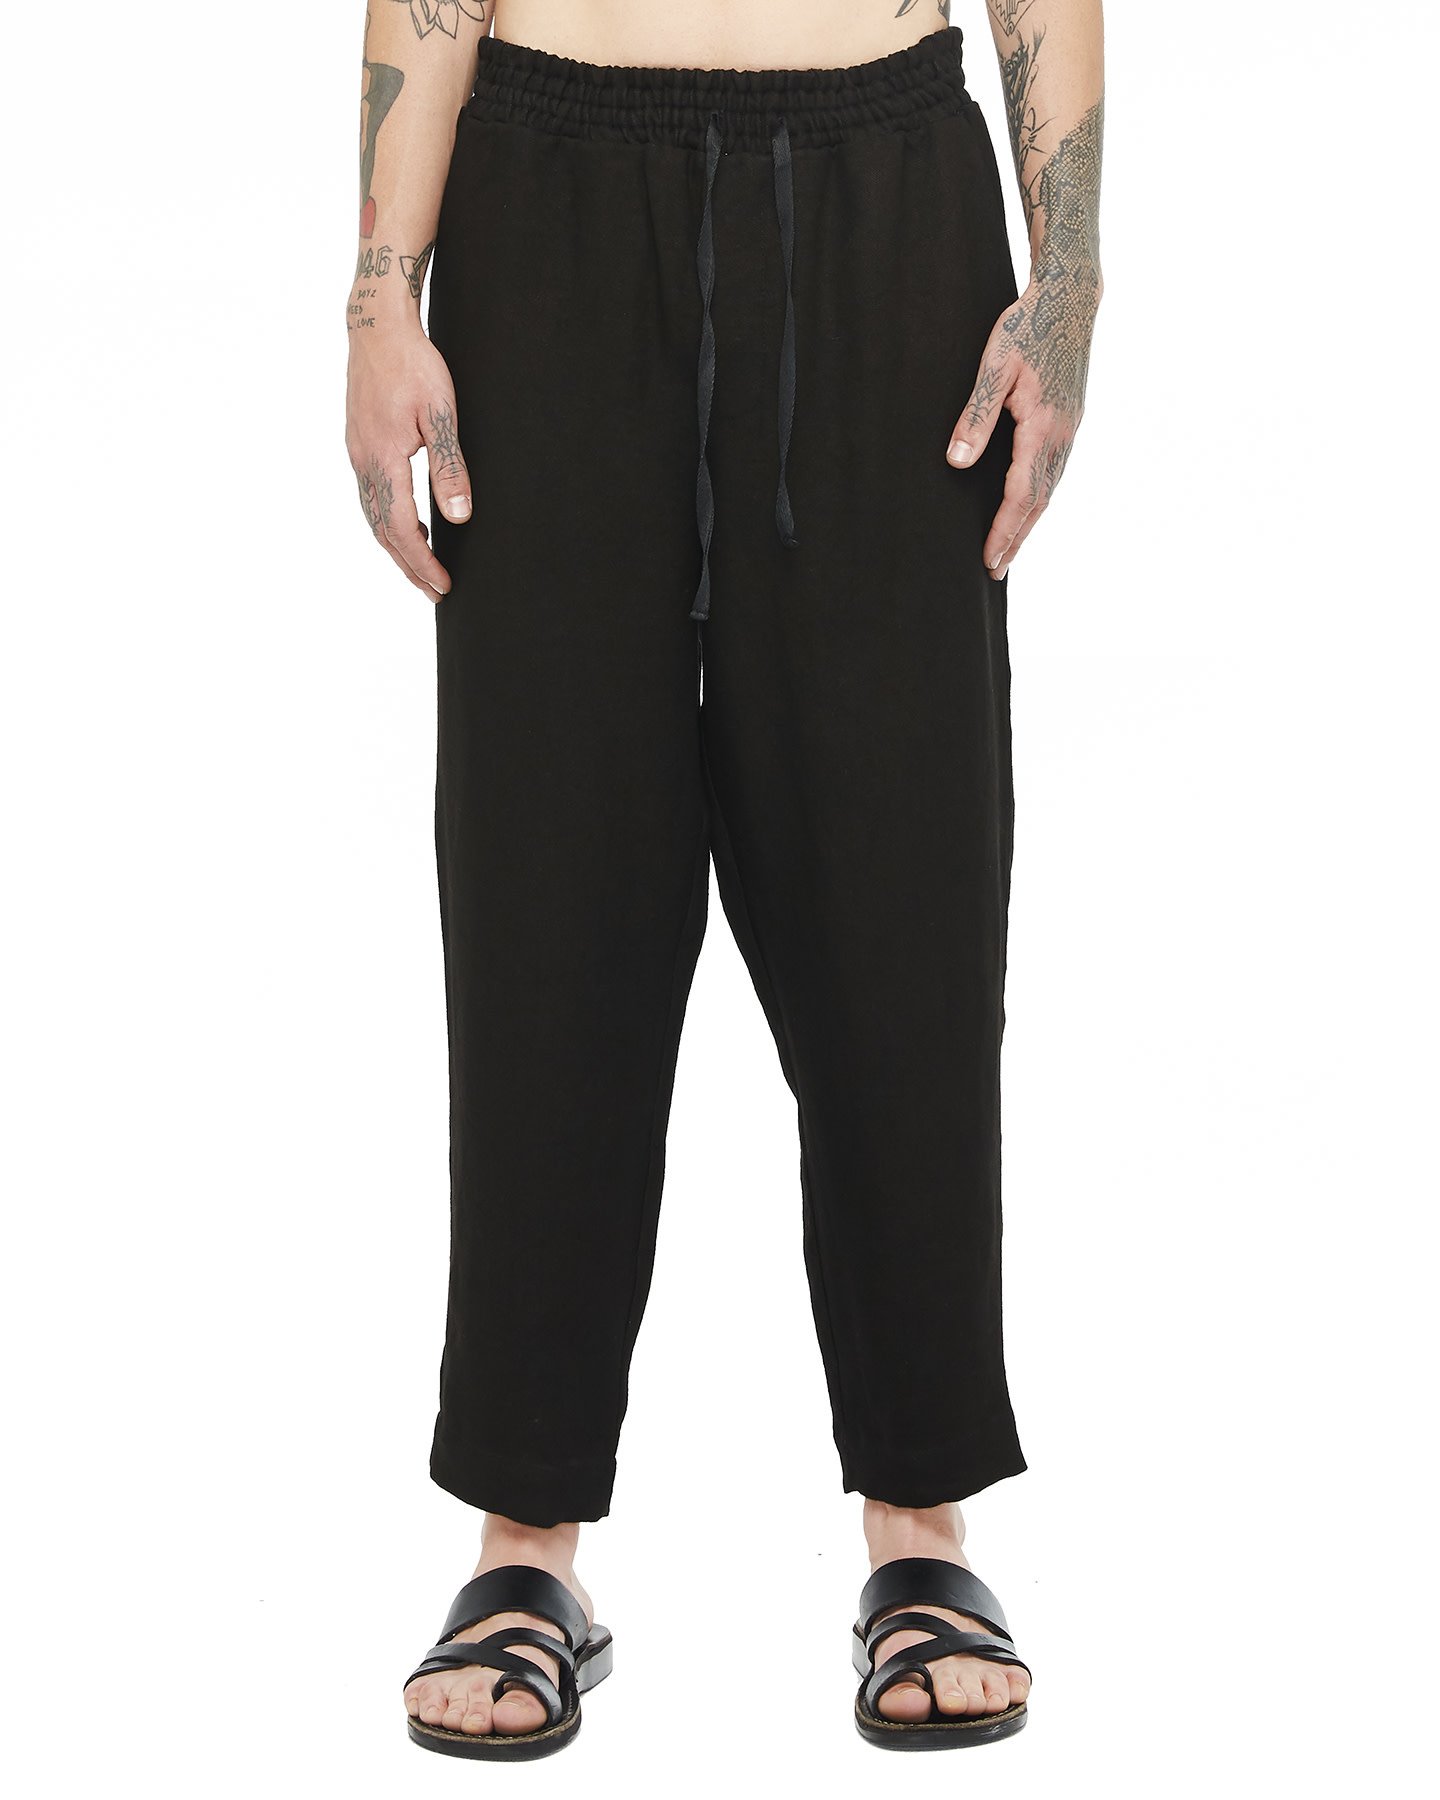 RELAXED LINEN PANT - BLACK